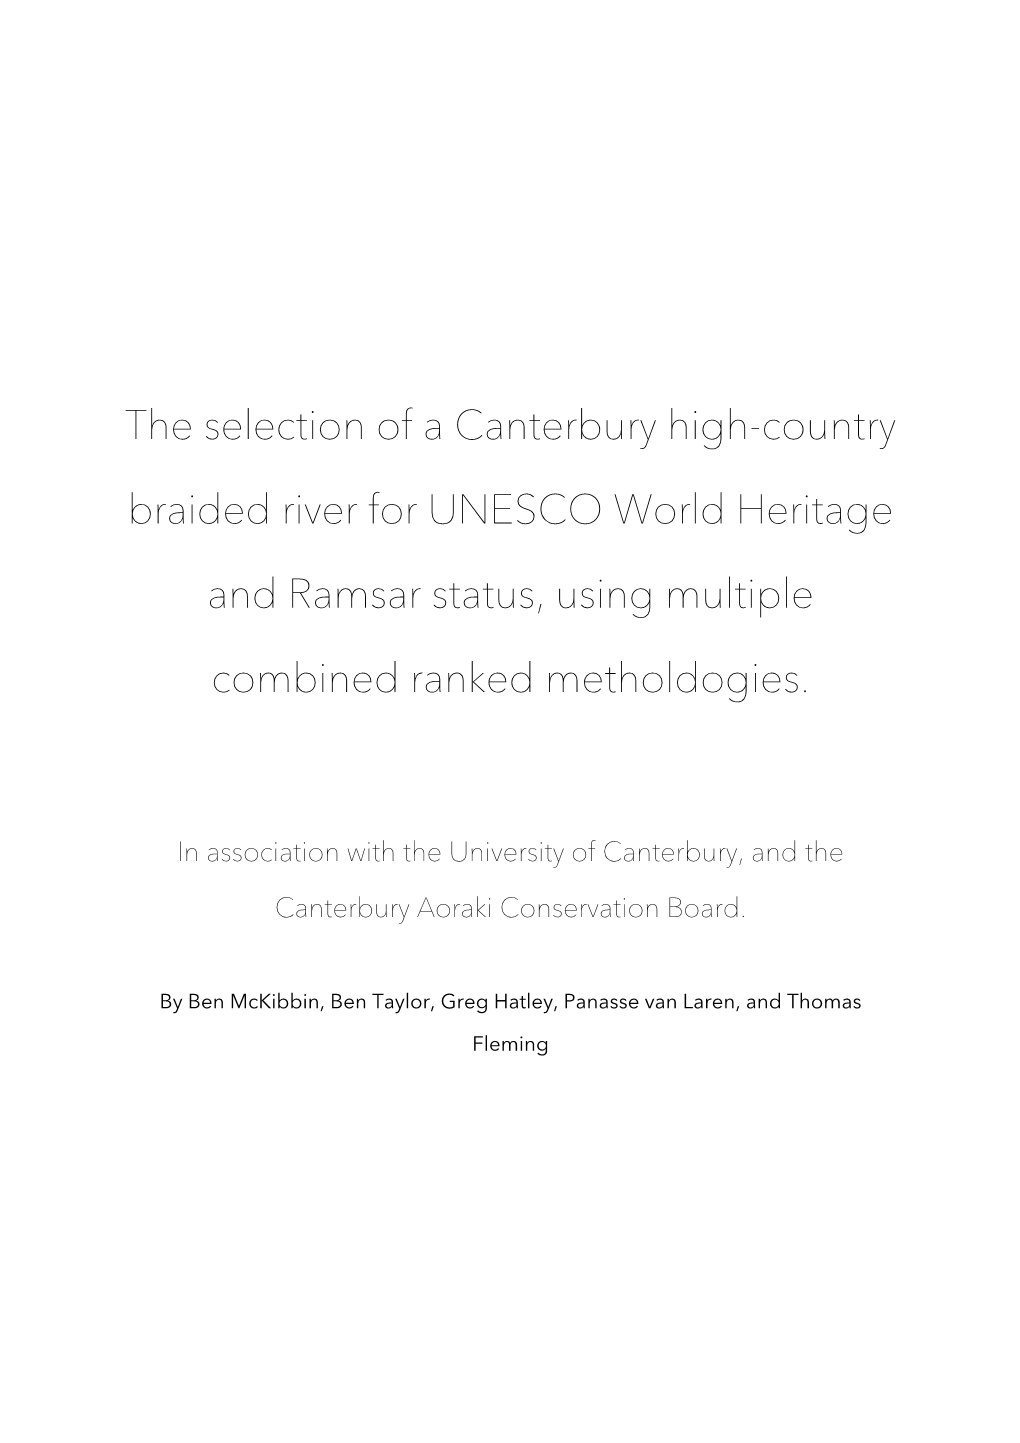 The Selection of a Canterbury High-Country Braided River for UNESCO World Heritage